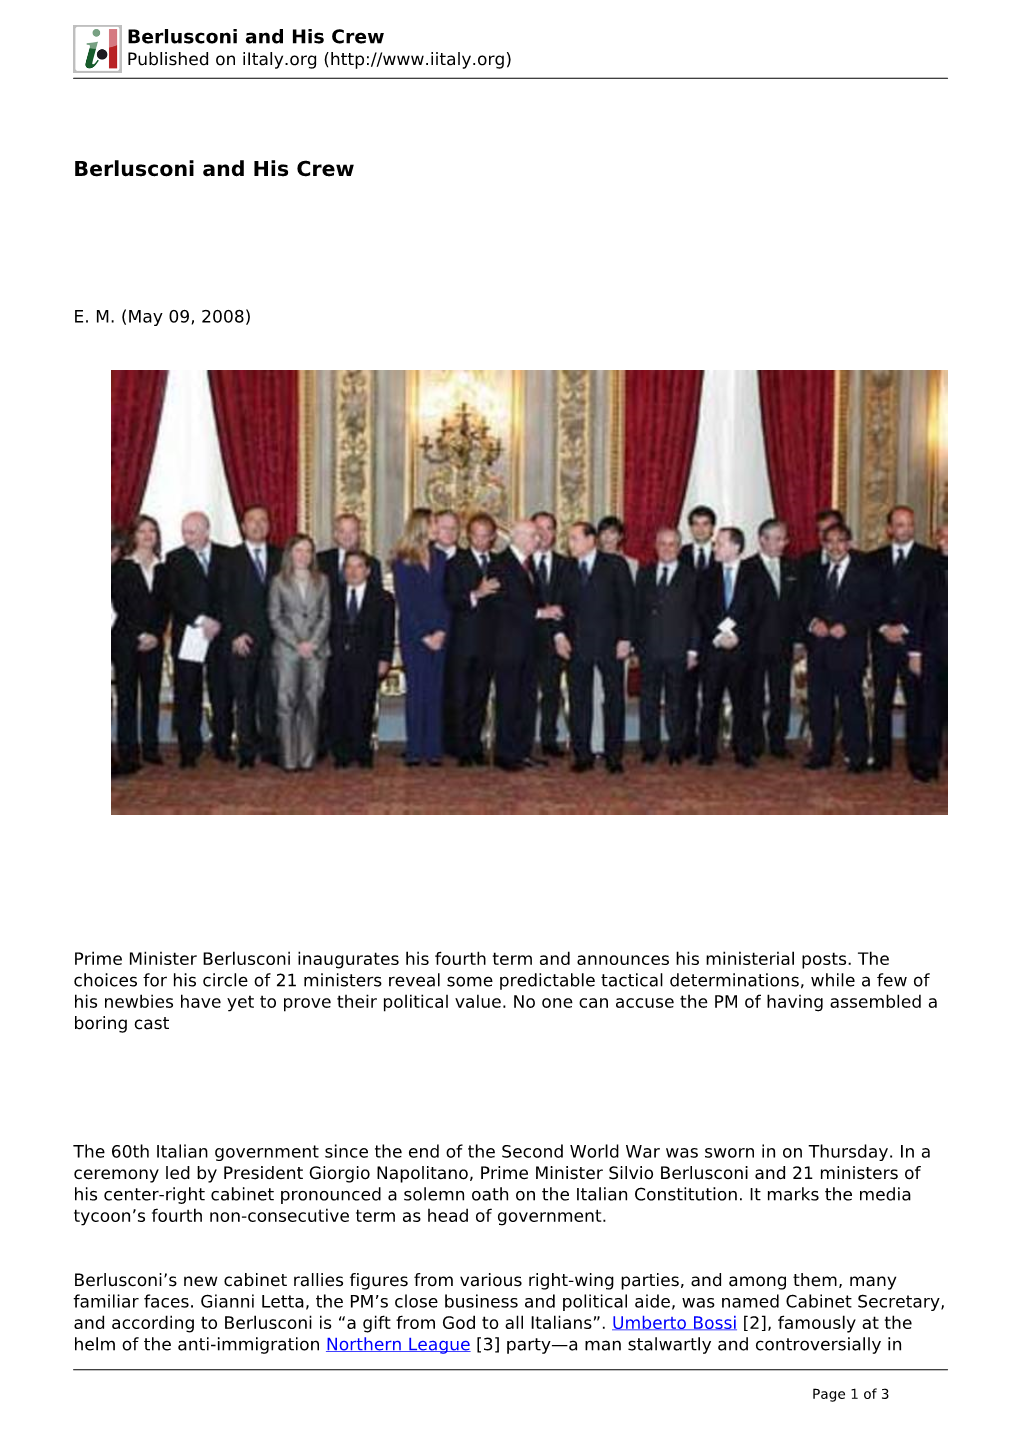 Berlusconi and His Crew Published on Iitaly.Org (